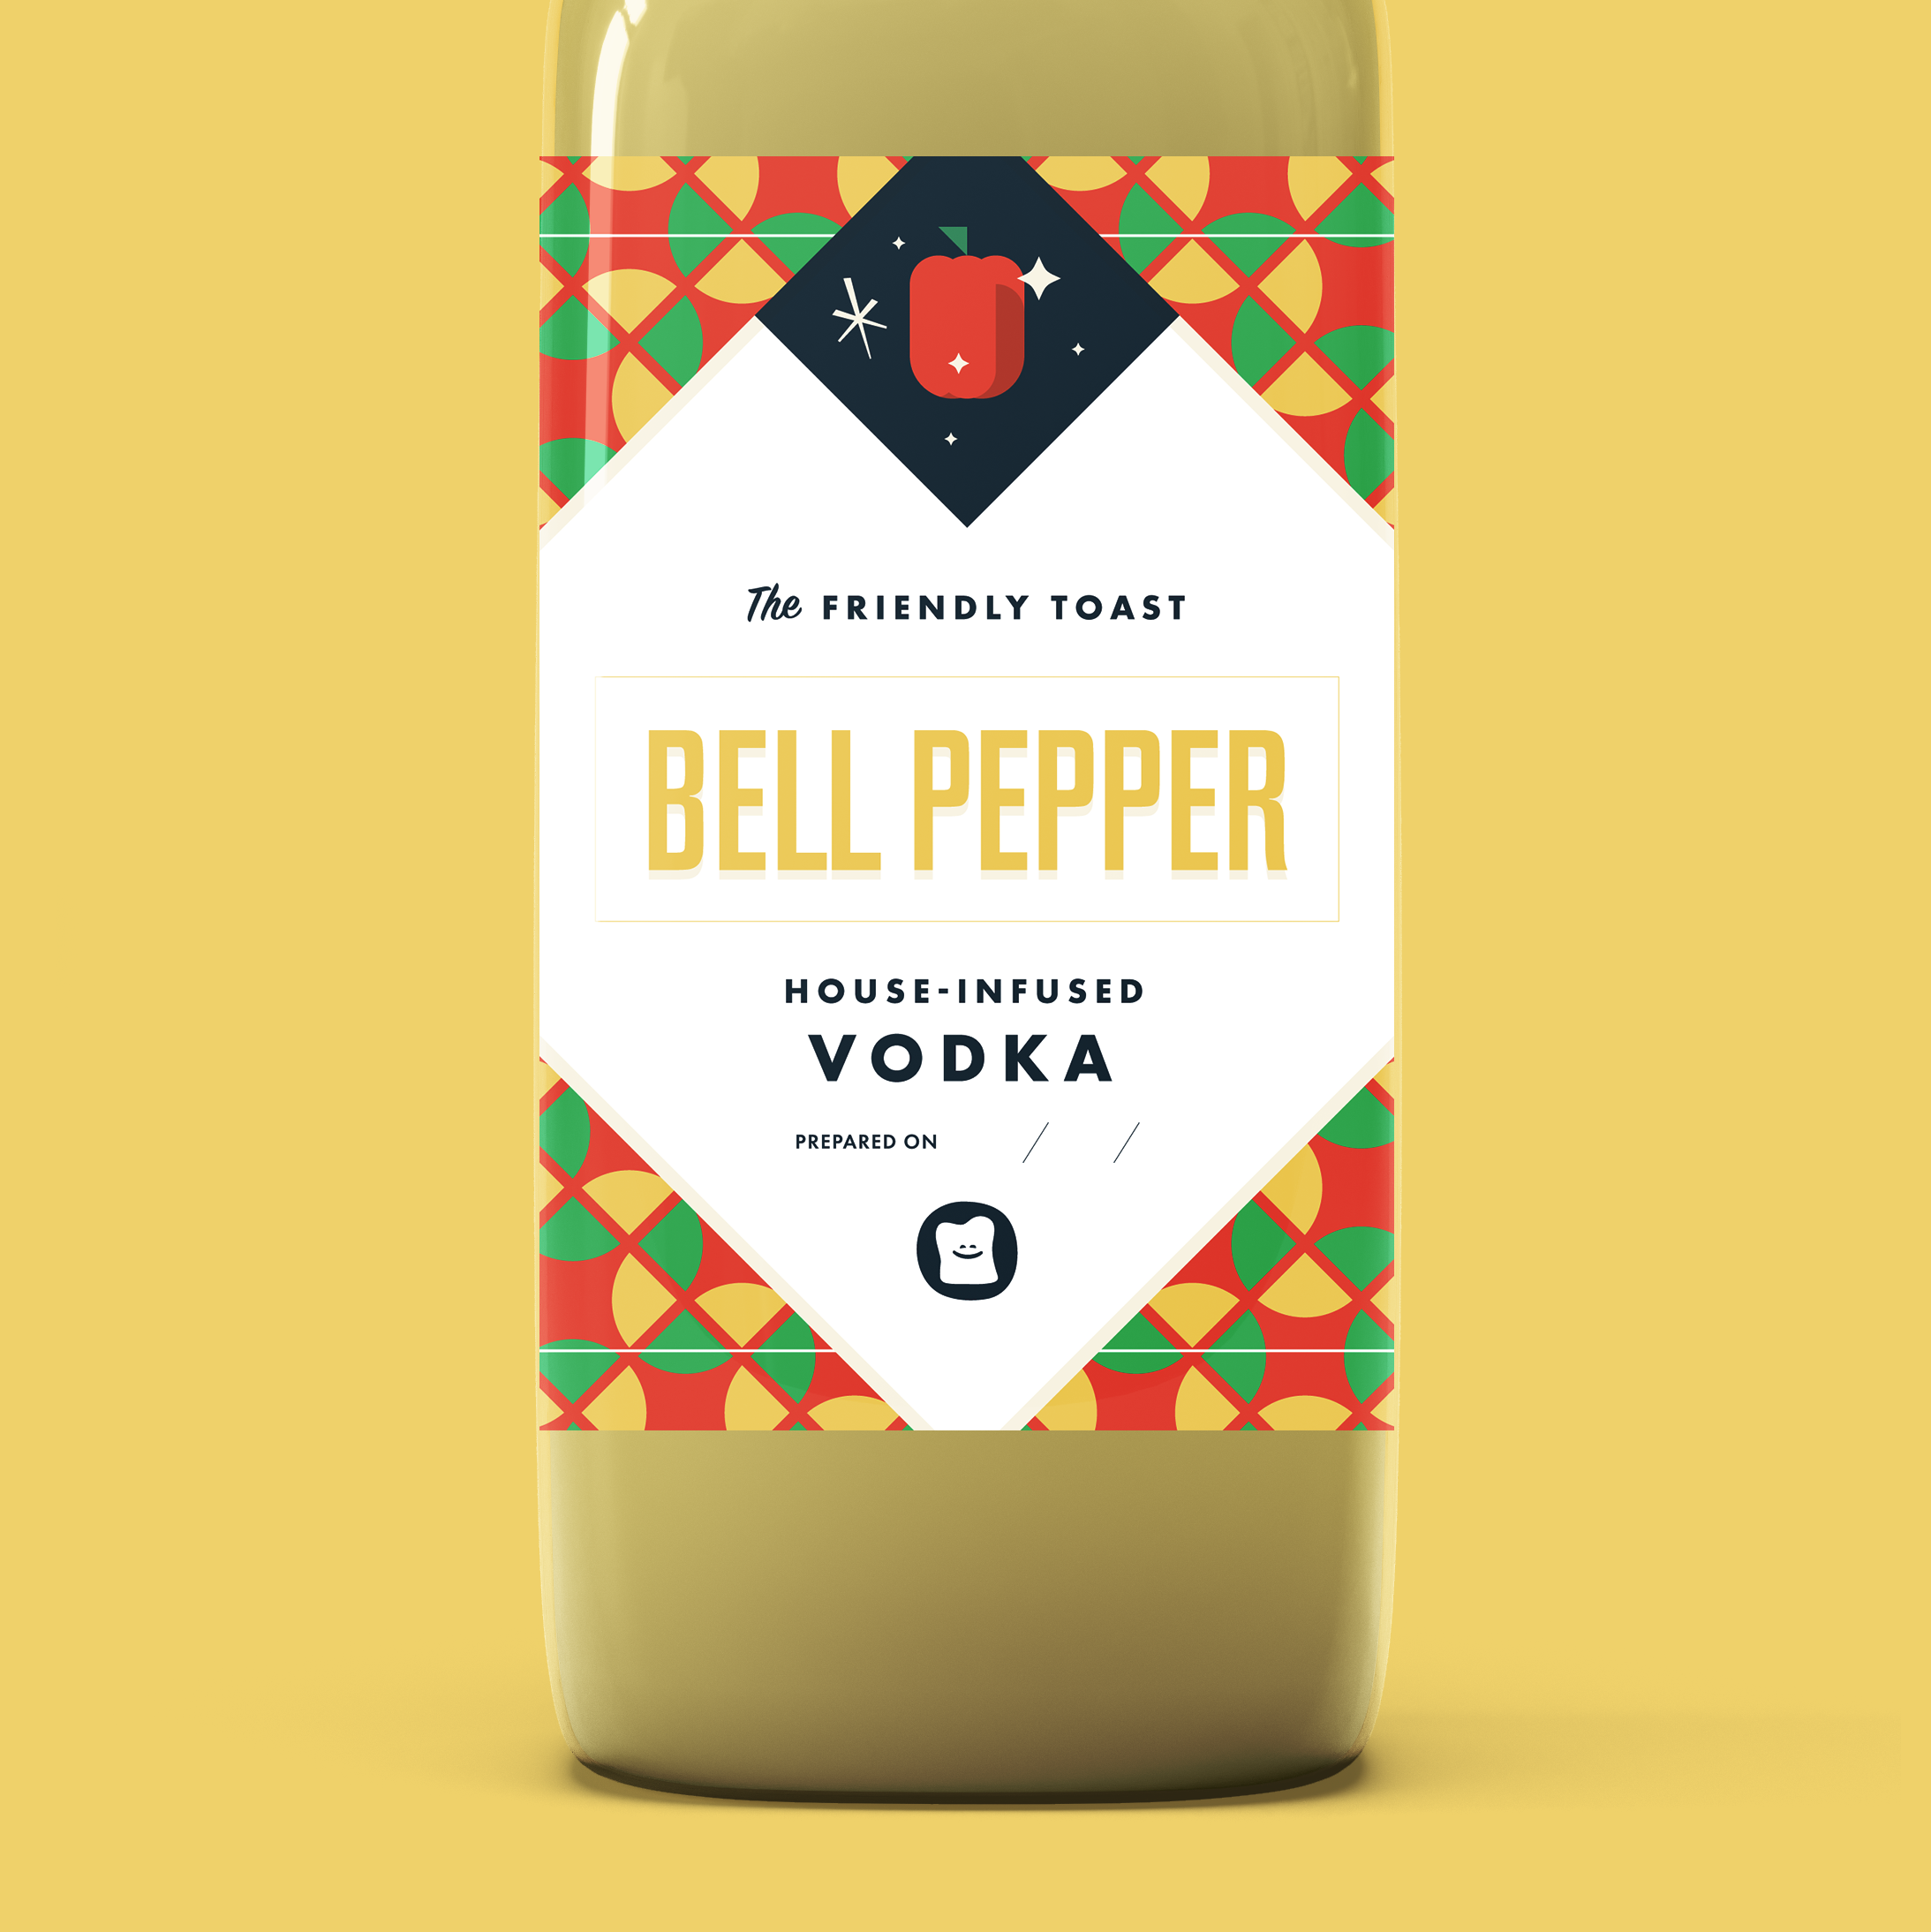 The Friendly Toast House-Infused Bell Pepper Vodka Bottle Label